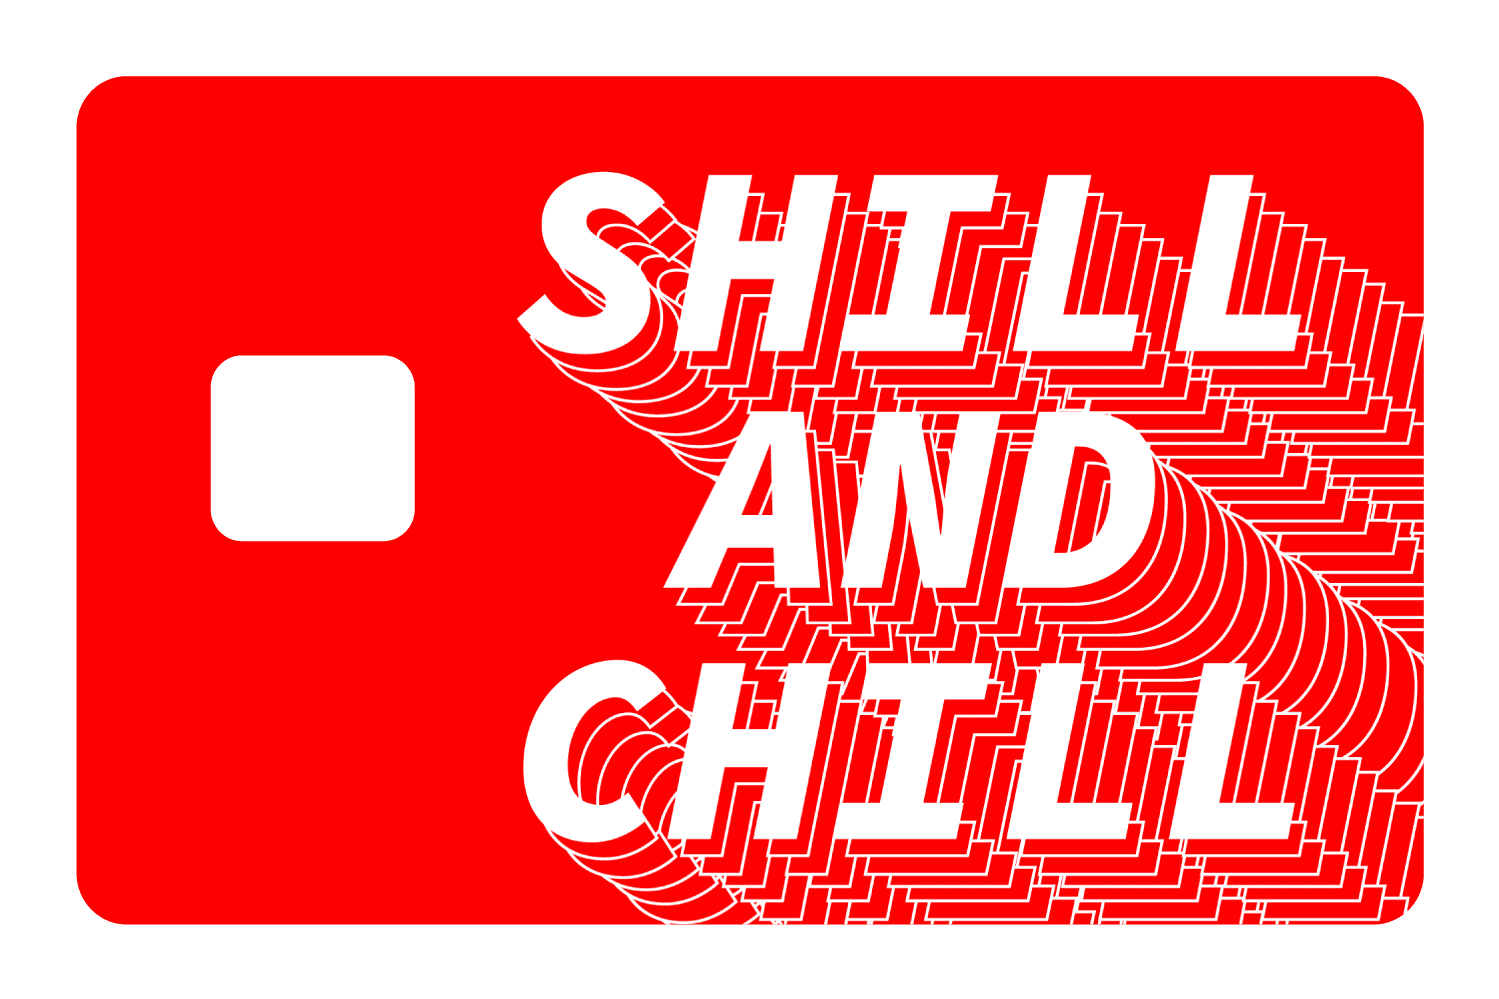 Shill and Chill